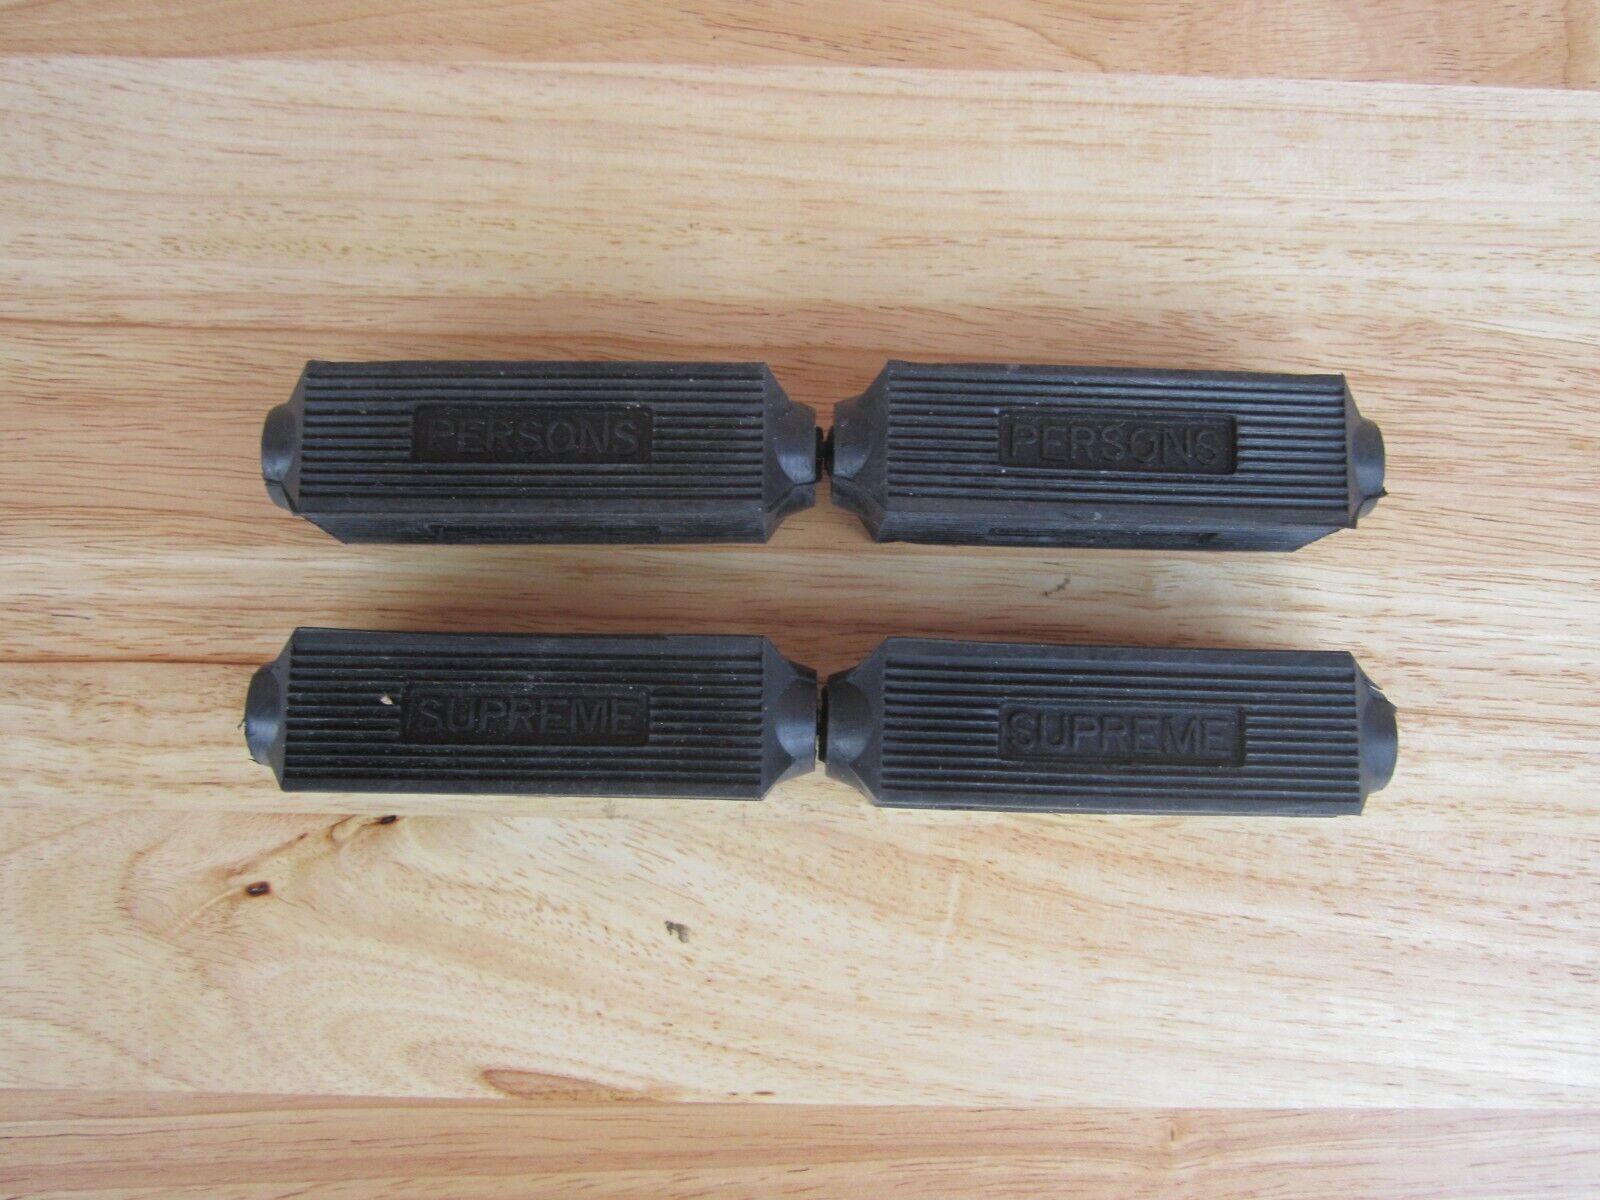 Brand new set of 4 Persons Supreme pedal blocks for roadmaster bikes for sale